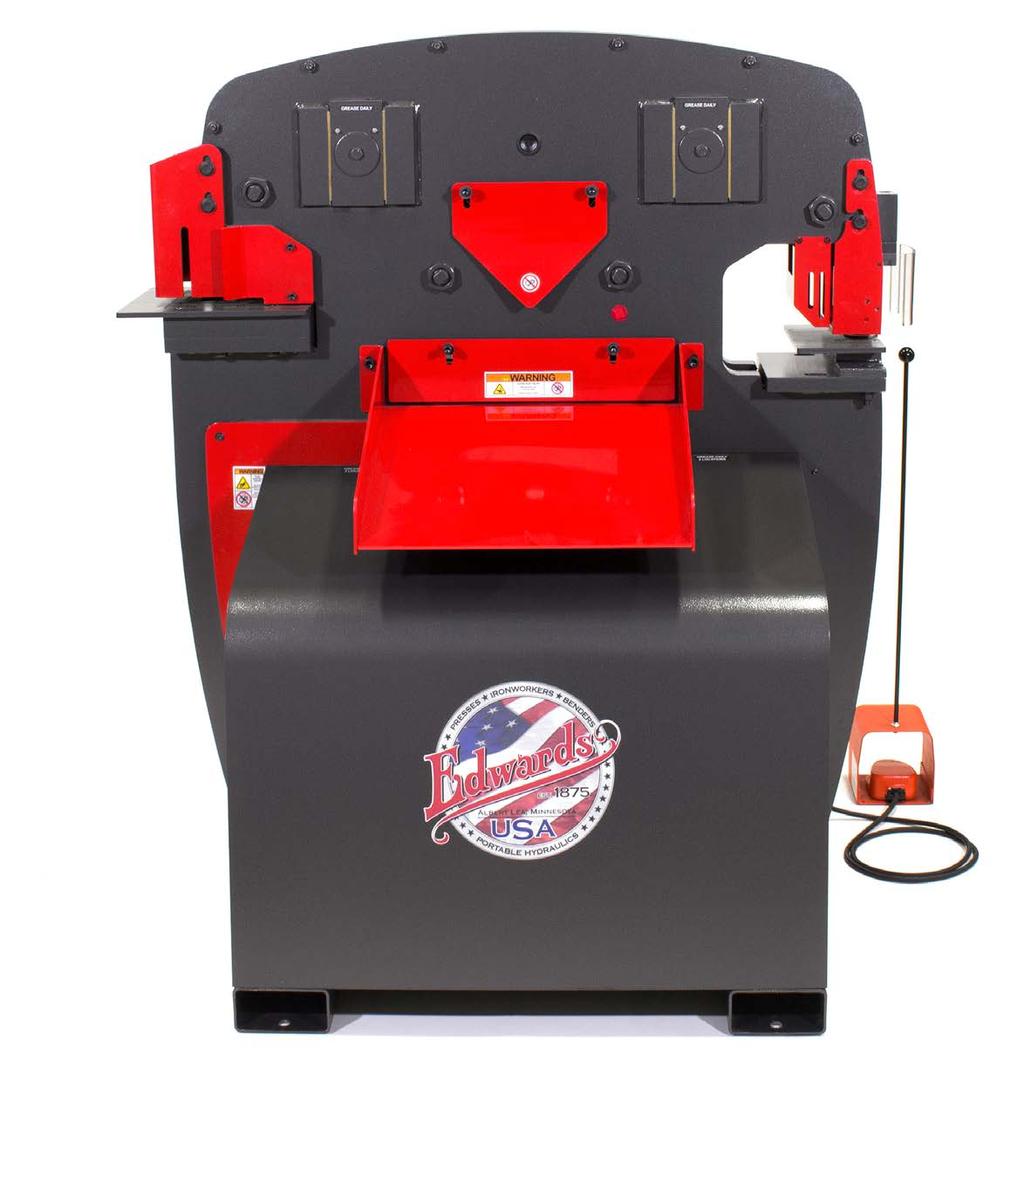 Station Rear Drop Off Punch Station Flat Bar Shear Station Grease Daily 8 Locations Flat